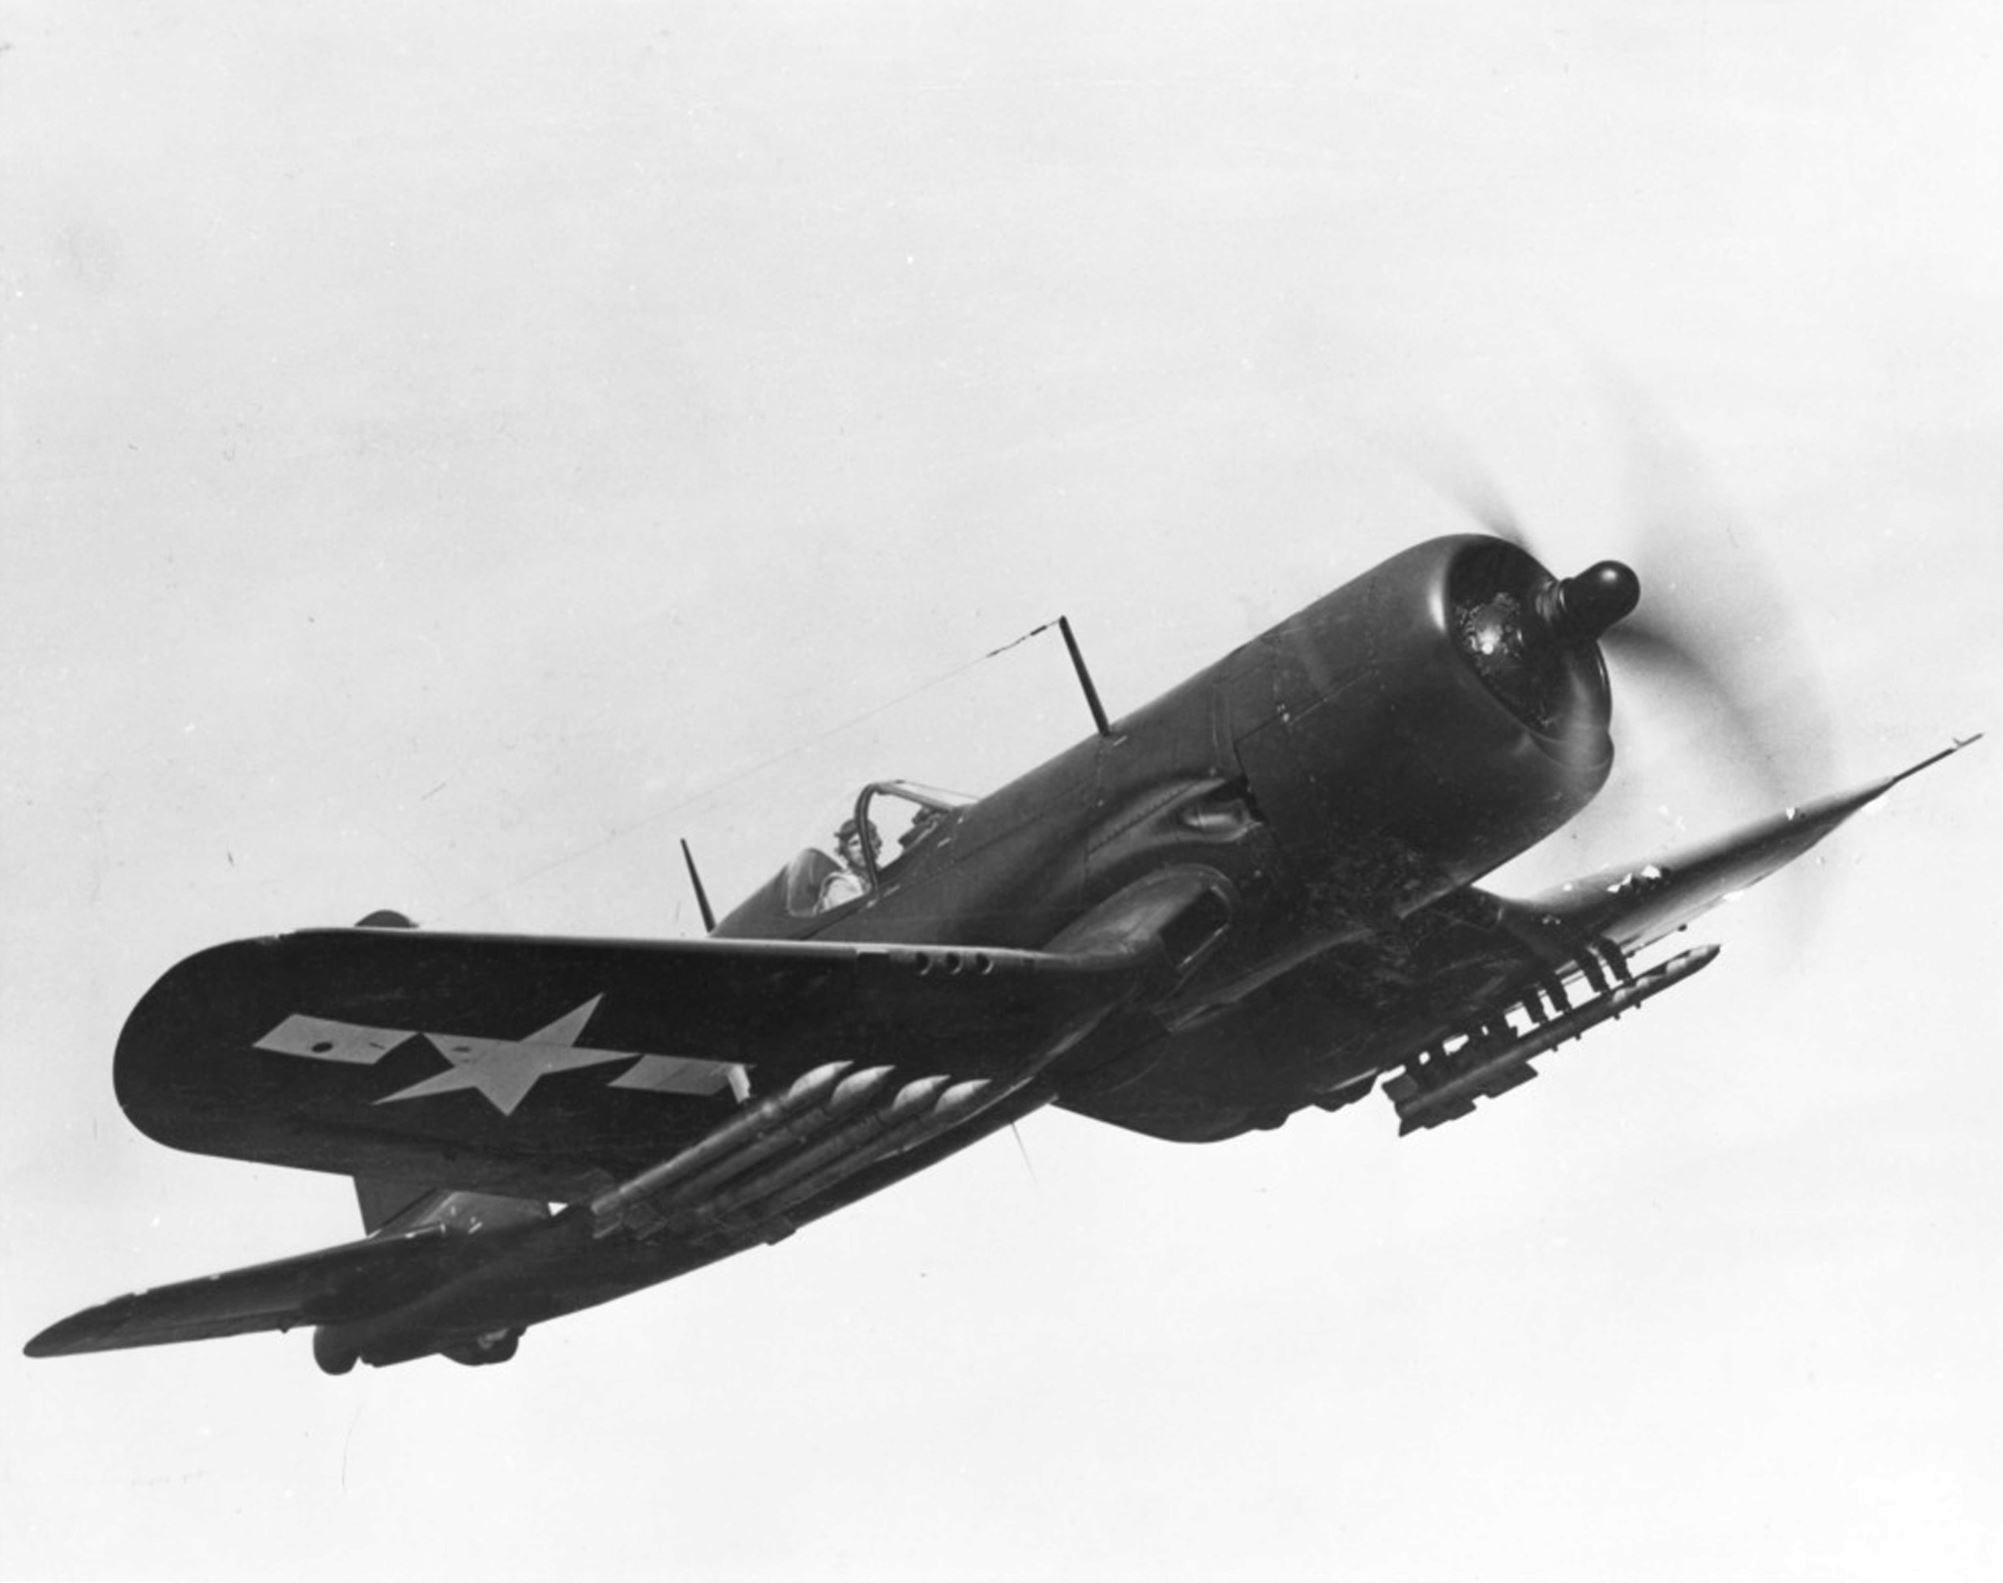 Vought F4U Corsair in flight, mid-1944, location uncertain. Note wing mounted HVAR air-to-surface rockets.